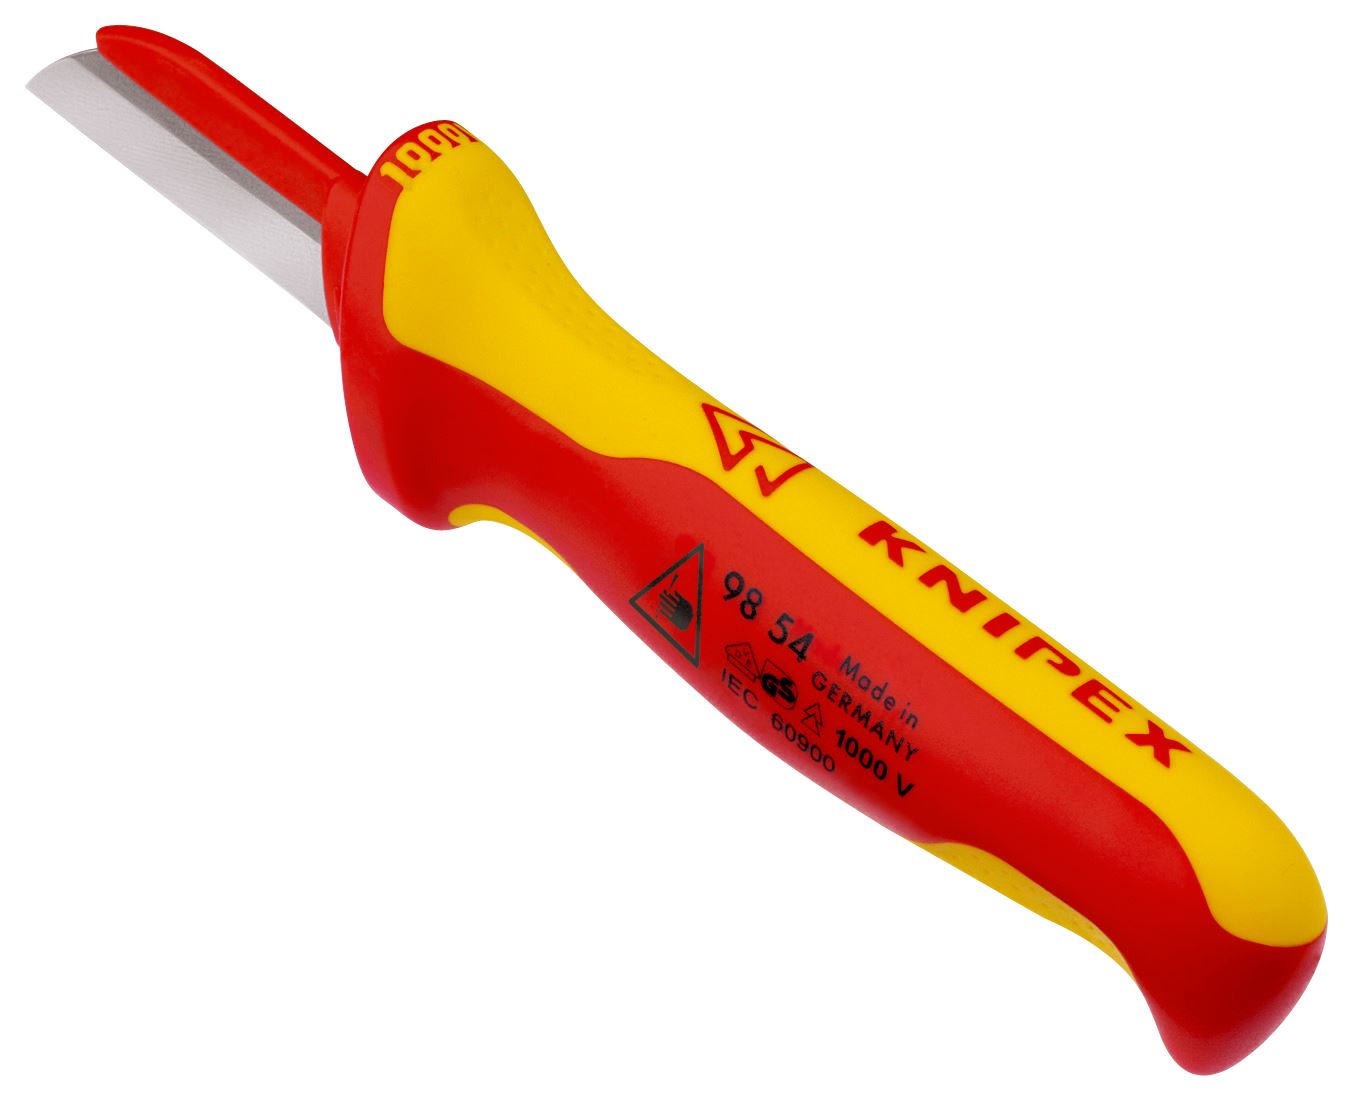 KNIPEX Cable Knife 190mm VDE Insulated Multi Component Handle 50mm Blade Length 98 54 SB